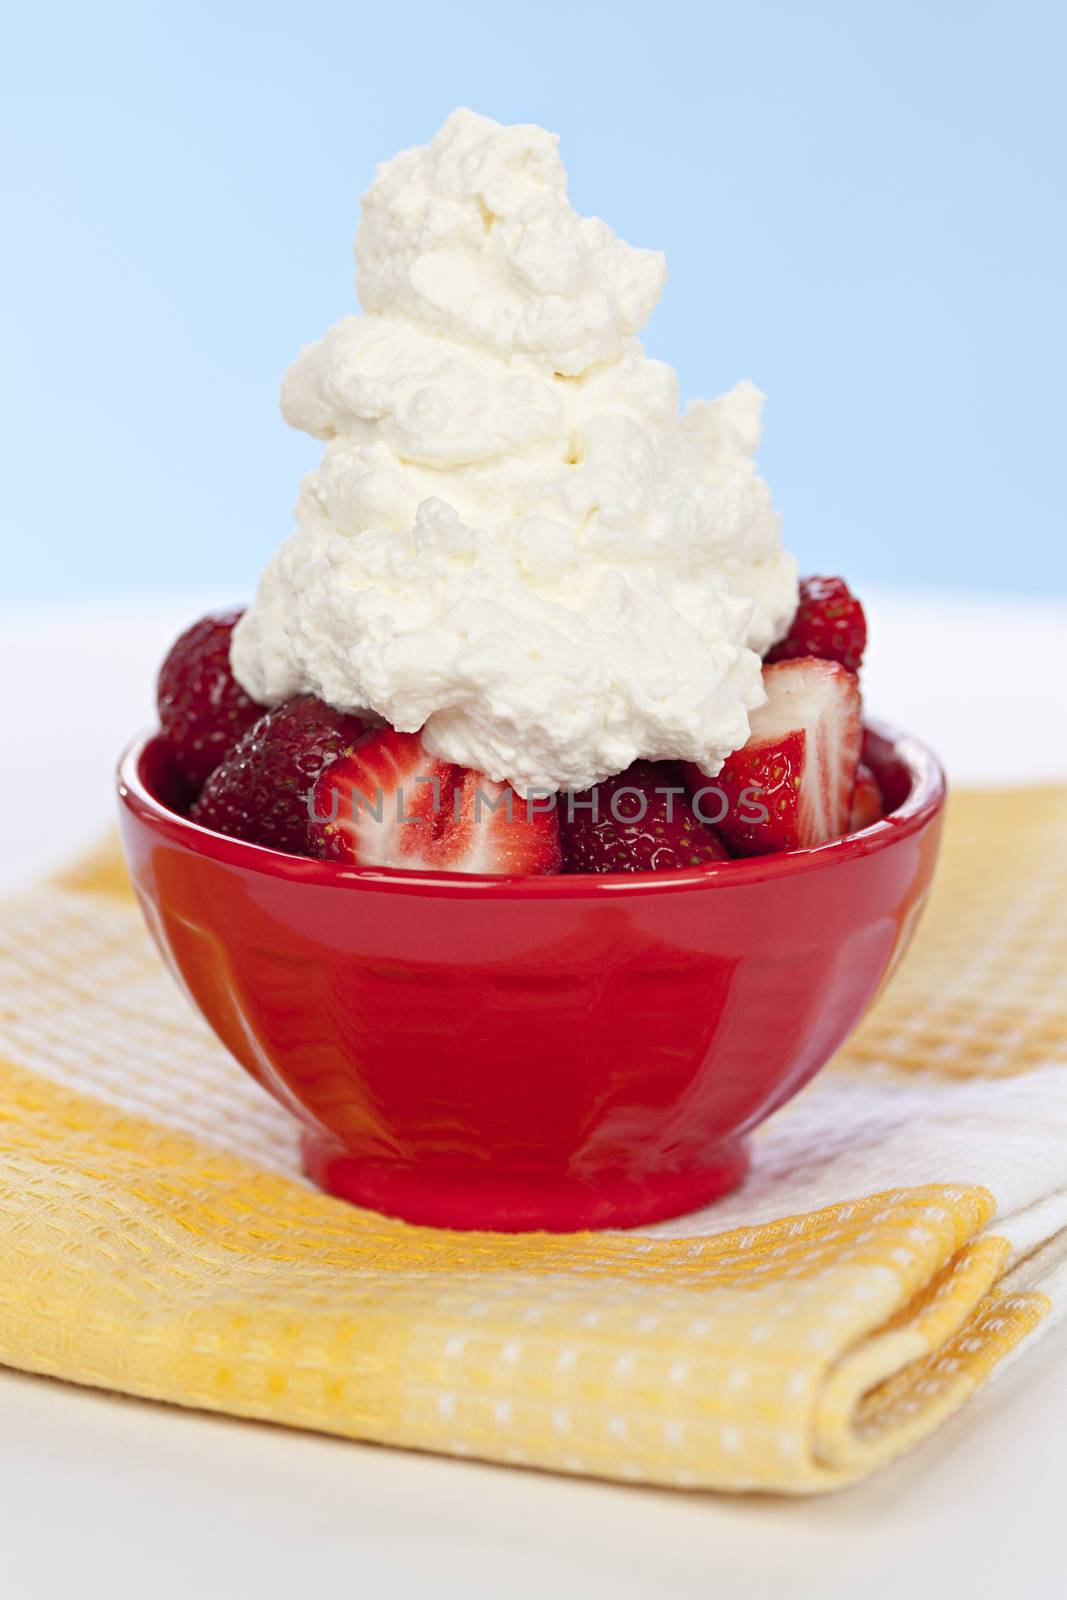 Fresh strawberries with whipped cream by elenathewise